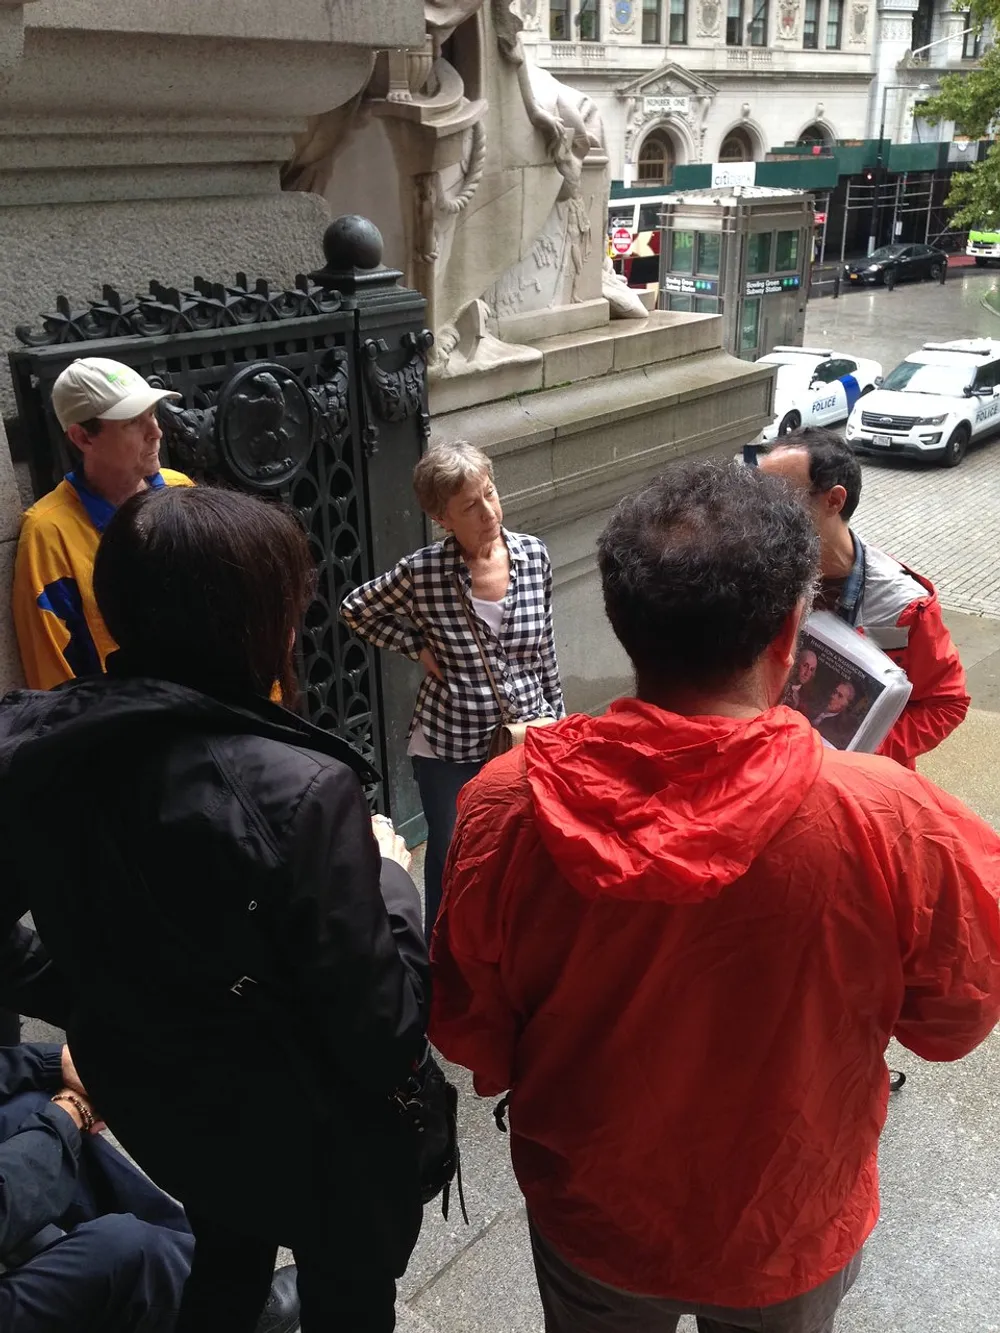 A group of people appears engaged in an outdoor discussion near a historical buildings gate with one person holding what looks to be a magazine or folder